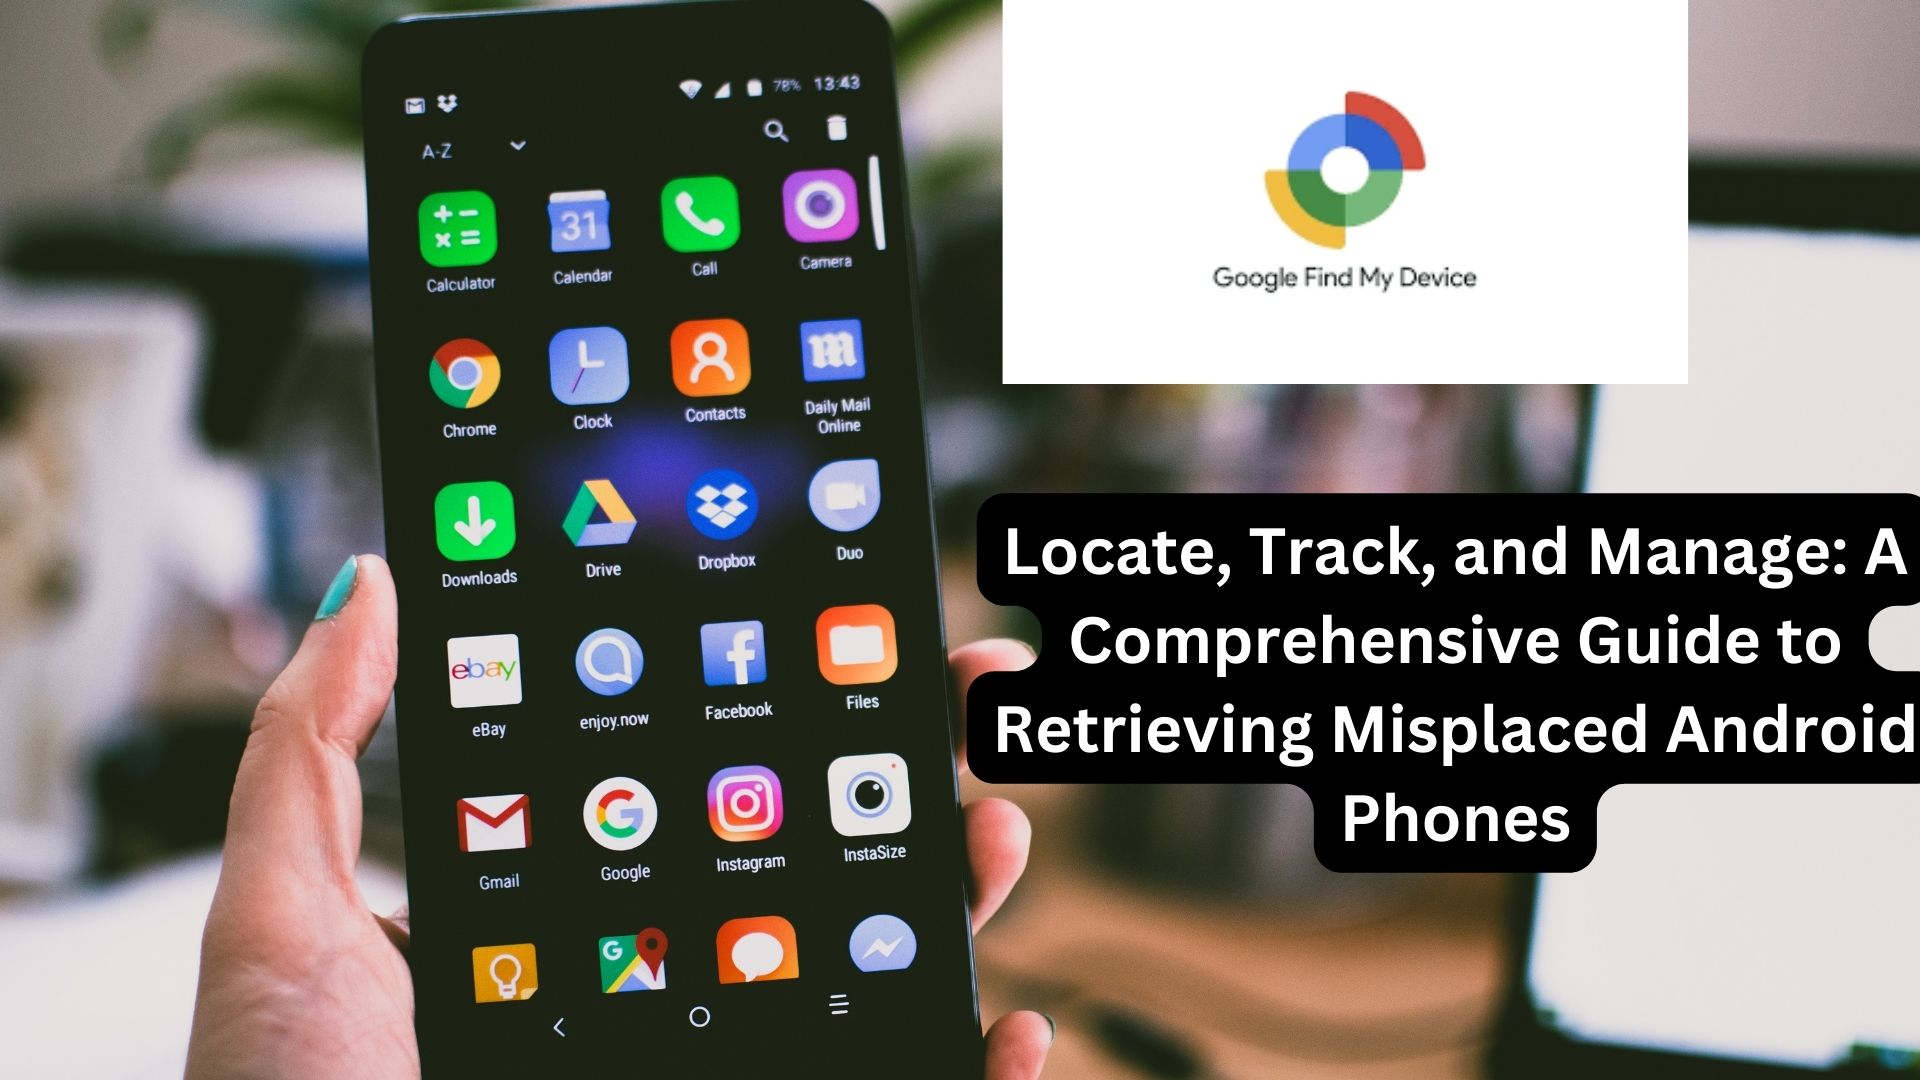 Locate, Track, and Manage: A Comprehensive Guide to Retrieving Misplaced Android Phones